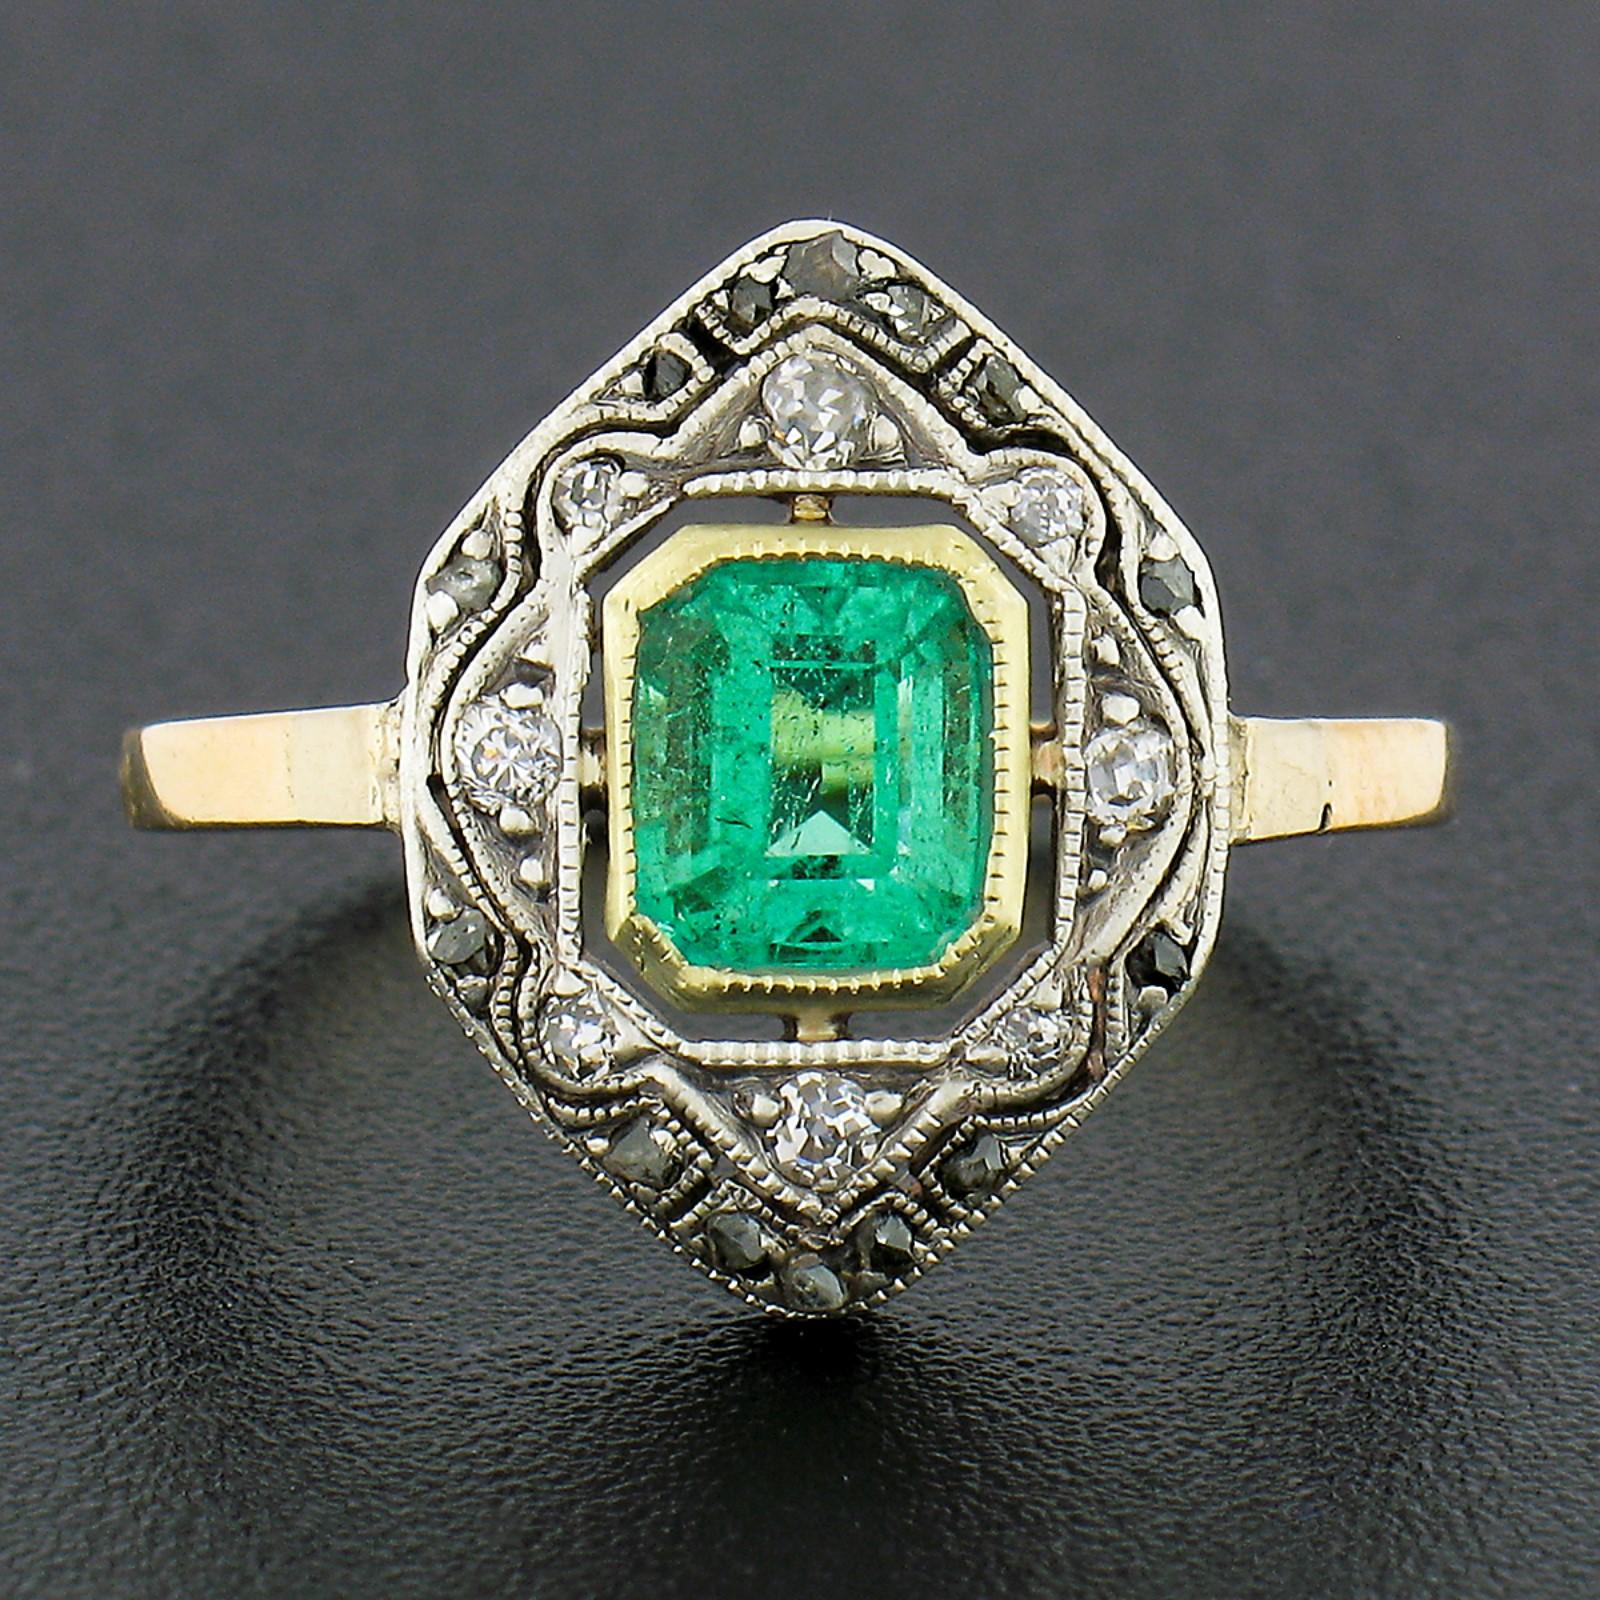 This gorgeous antique platter ring was crafted from solid 14k yellow gold and silver during the Edwardian period. It features a very fine natural emerald neatly bezel set at the open center displaying the most gorgeous, truly vivid, medium green